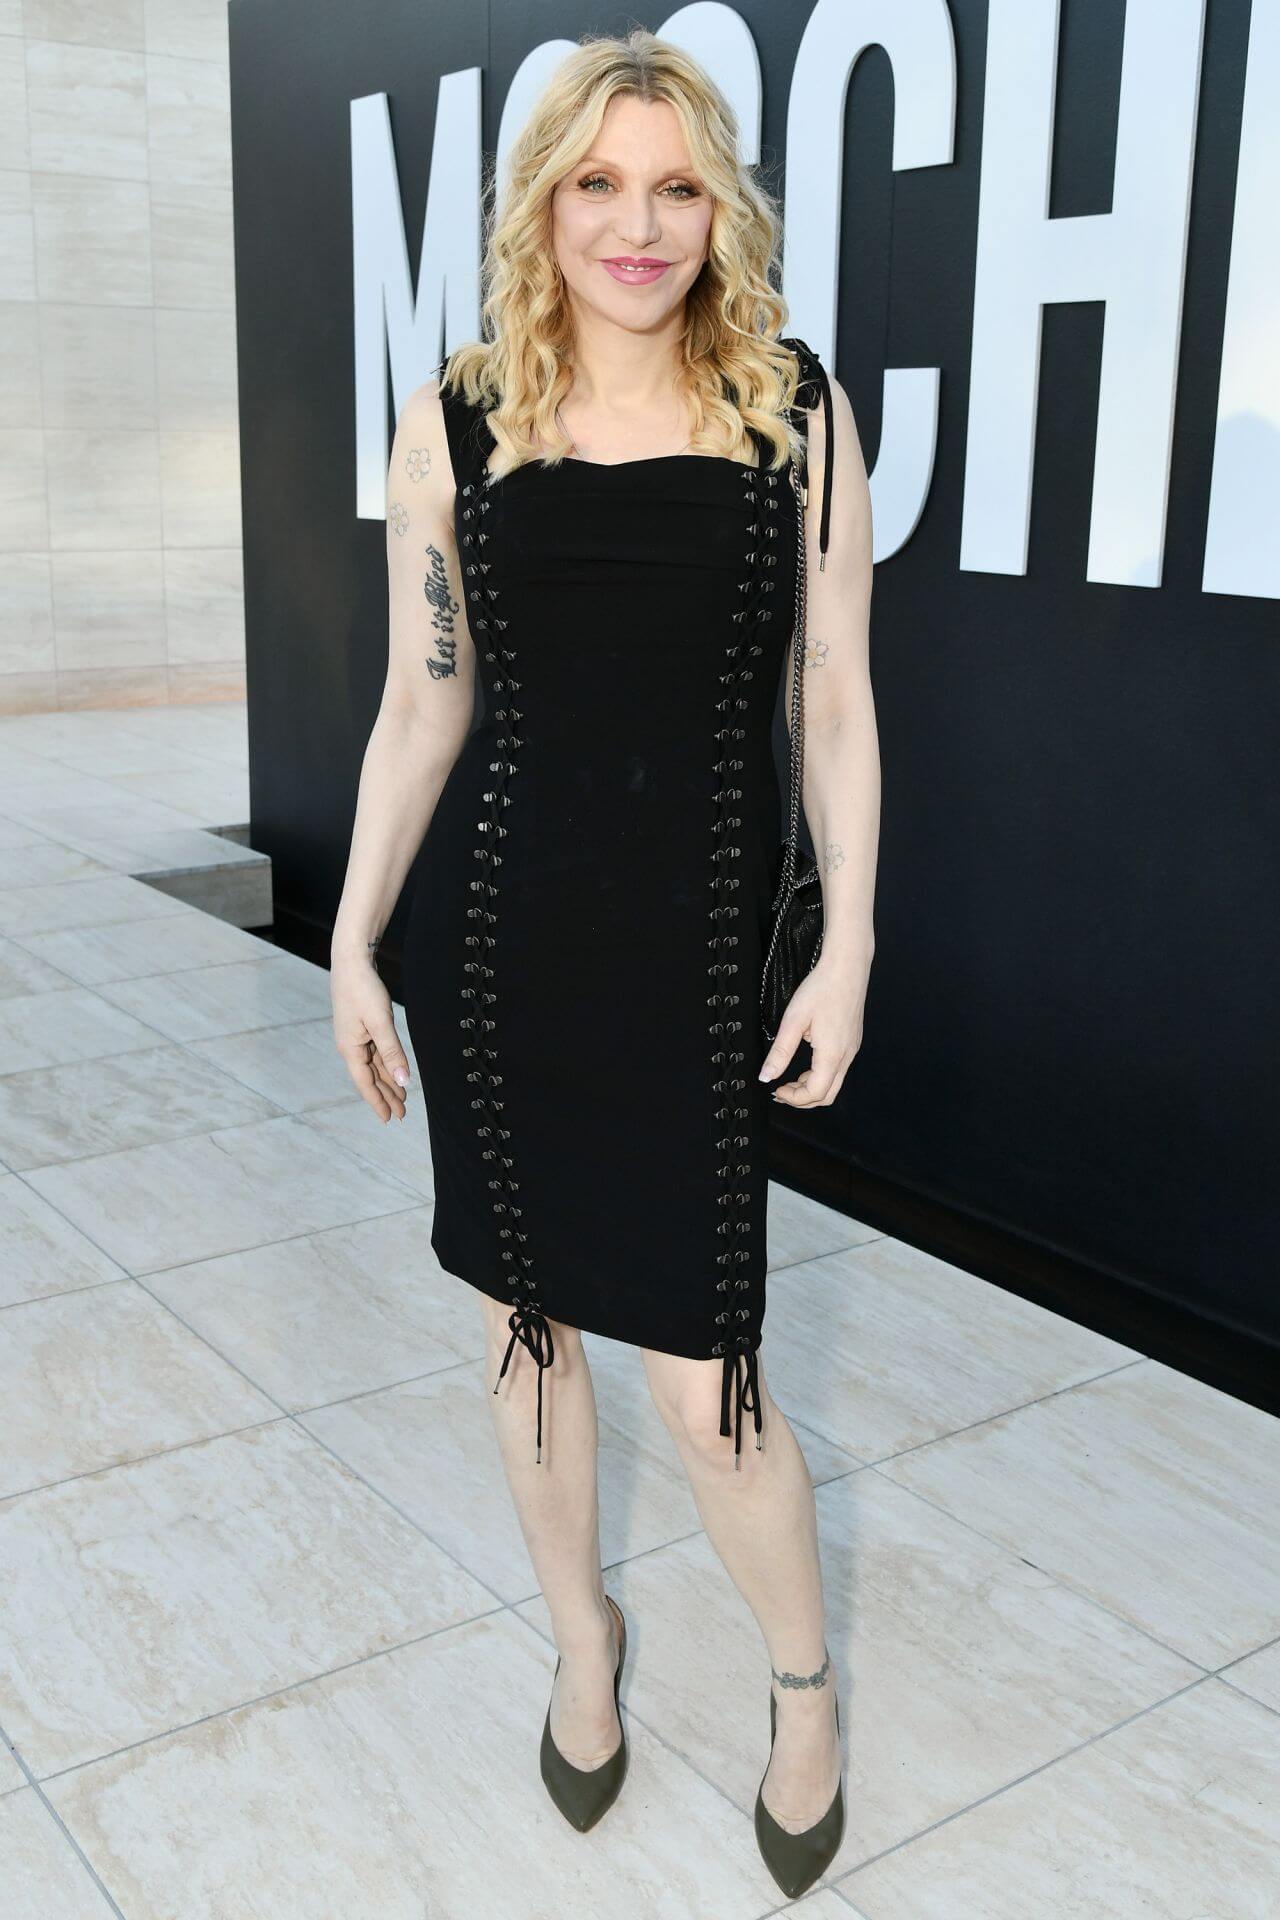 Courtney Love In Black Bodycon Dress At MOSCHINO Spring Summer Collection in LA